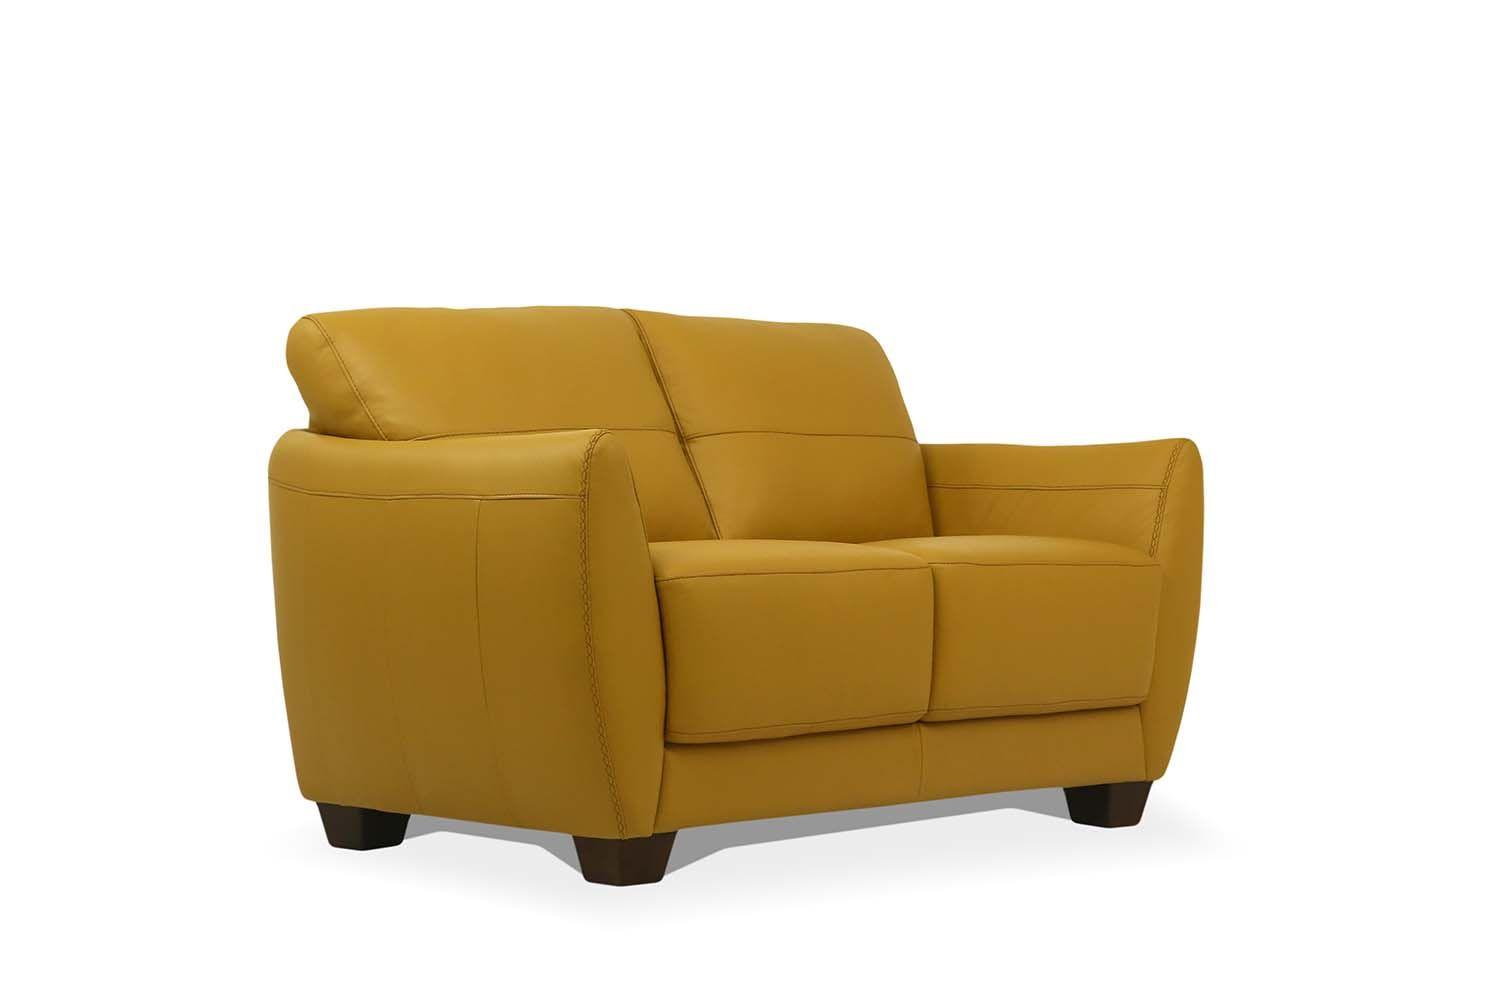 Modern, Transitional Loveseat Valeria 54946 in Yellow Leather